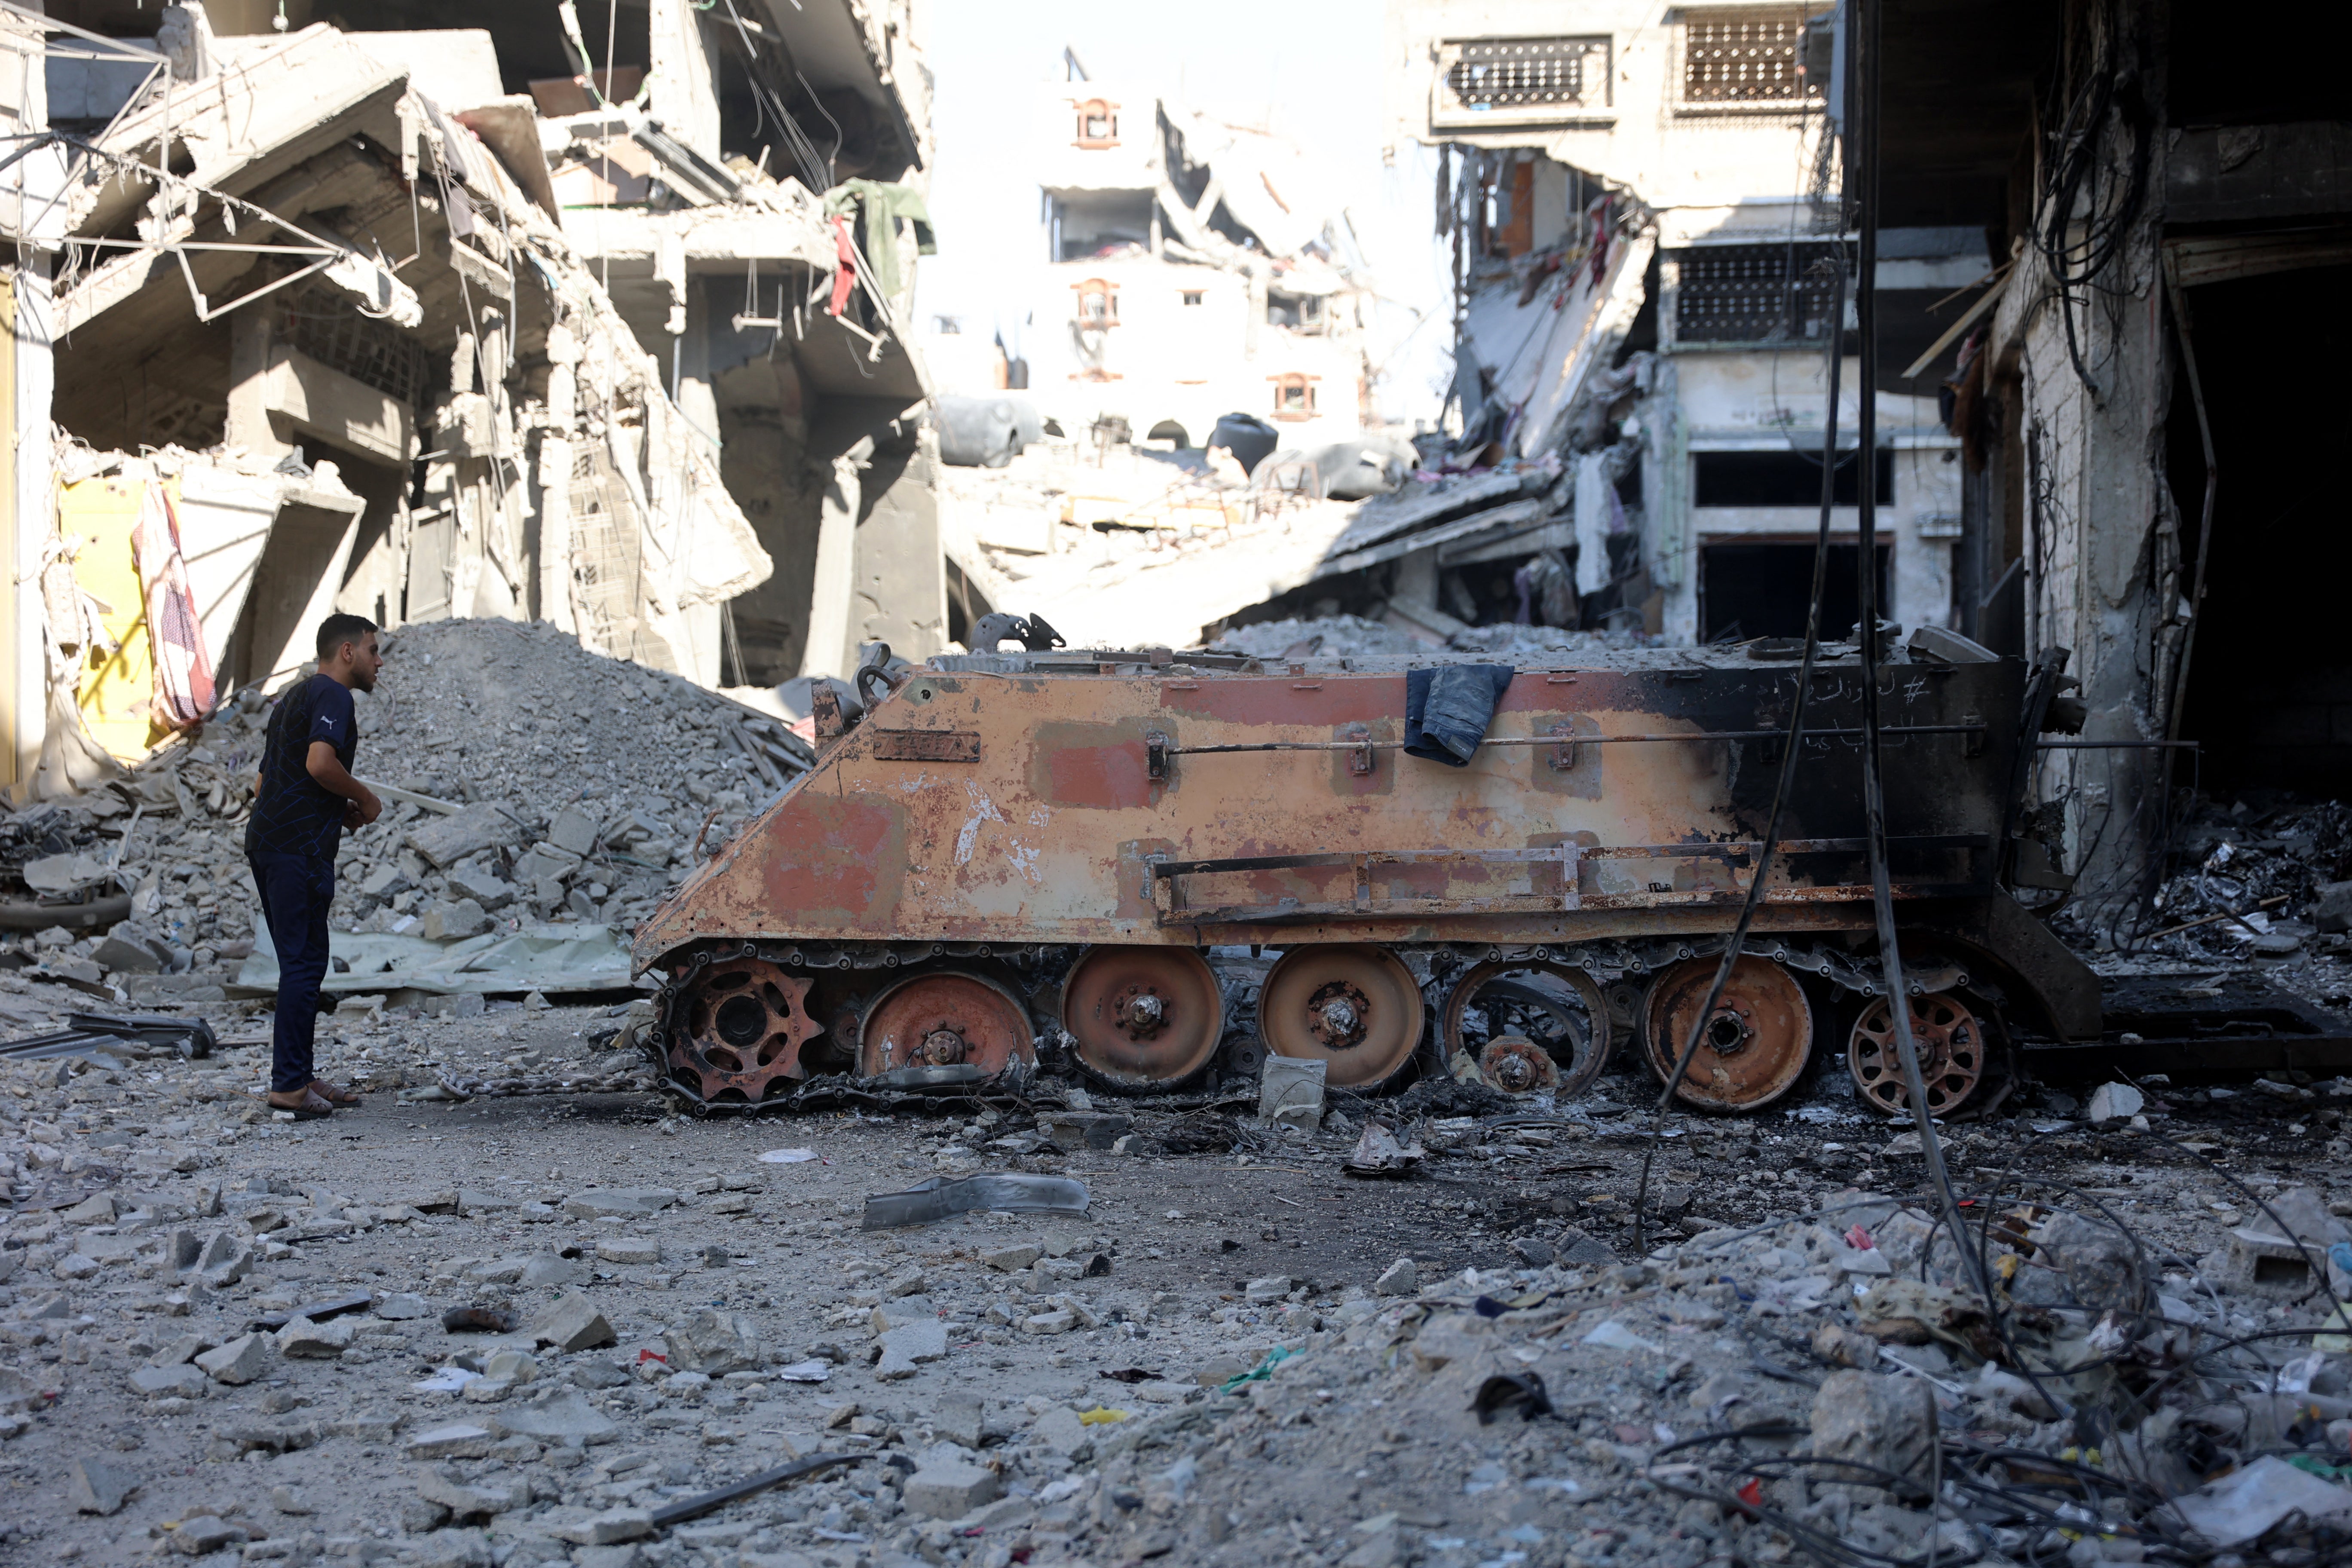 A Palestinian man looks at a destroyed Israeli military vehicle seen near the destroyed buildings and rubble